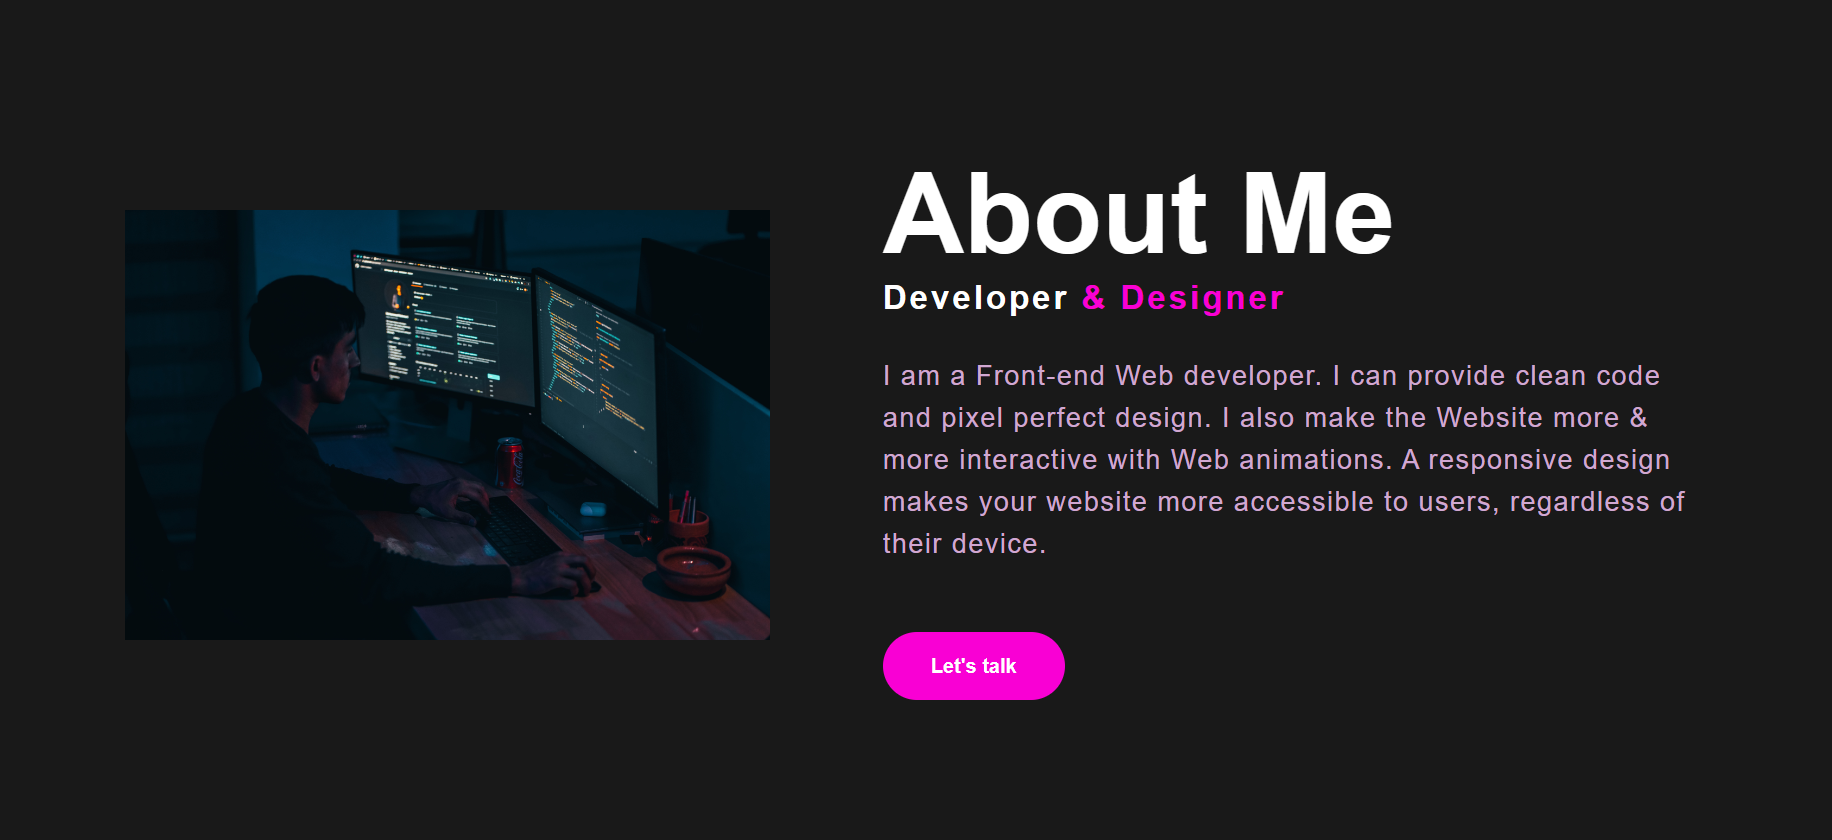 About Me

Developer

| am a Front-end Web developer. | can provide clean code
and pixel perfect design. | also make the Website more &amp;
more interactive with Web animations. A responsive design
makes your website more accessible to users, regardless of
their device.

Let's talk